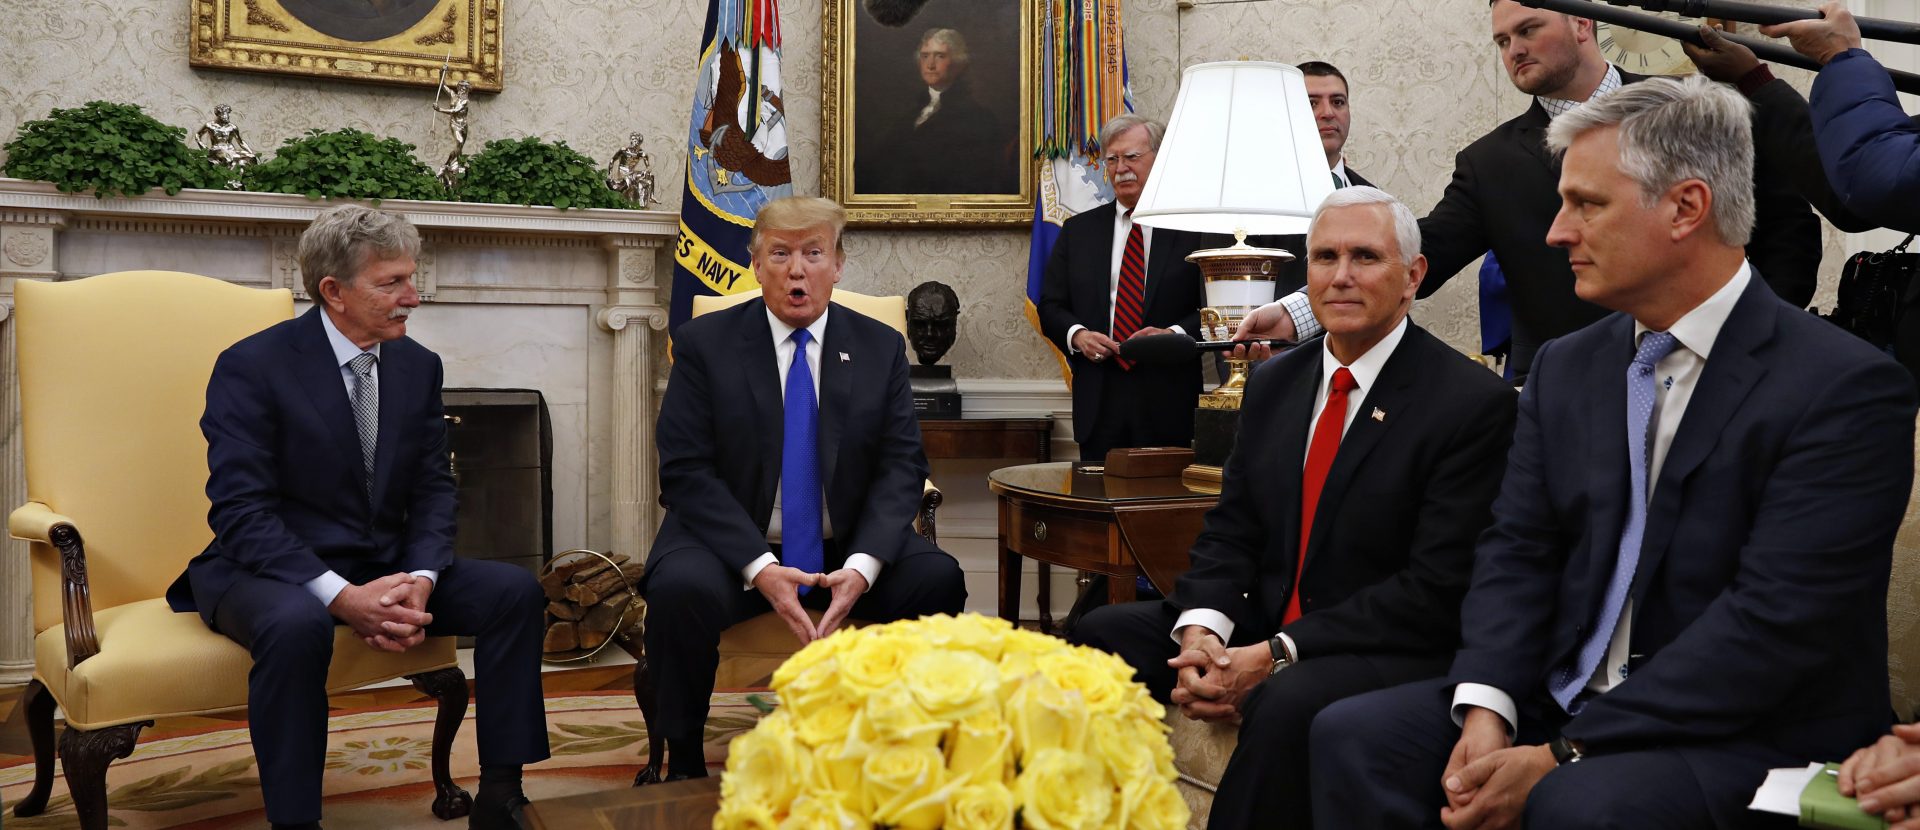 In this March 6, 2019, file photo, former U.S. hostage in Yemen, Danny Burch, left, listens as President Donald Trump speaks, Wednesday, March 6, 2019, in the Oval Office of the White House in Washington, next to Vice President Mike Pence, and Special Presidential Envoy for Hostage Affairs Robert O'Brien.